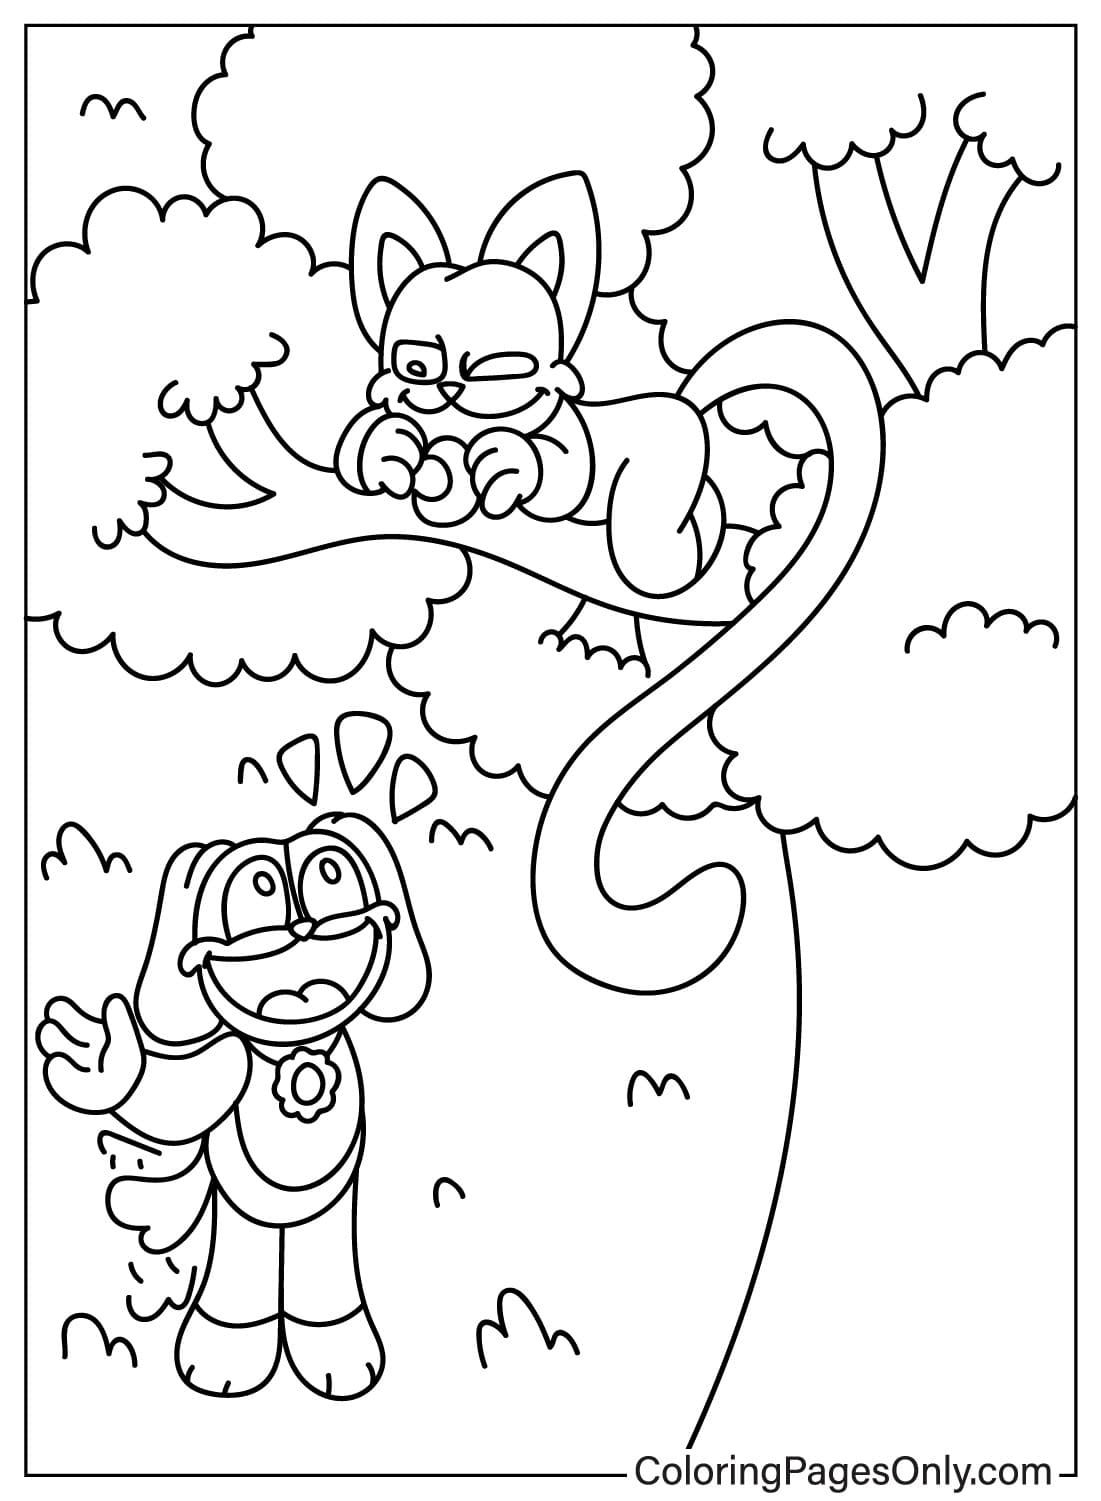 CatNap and DogDay Coloring Page from DogDay